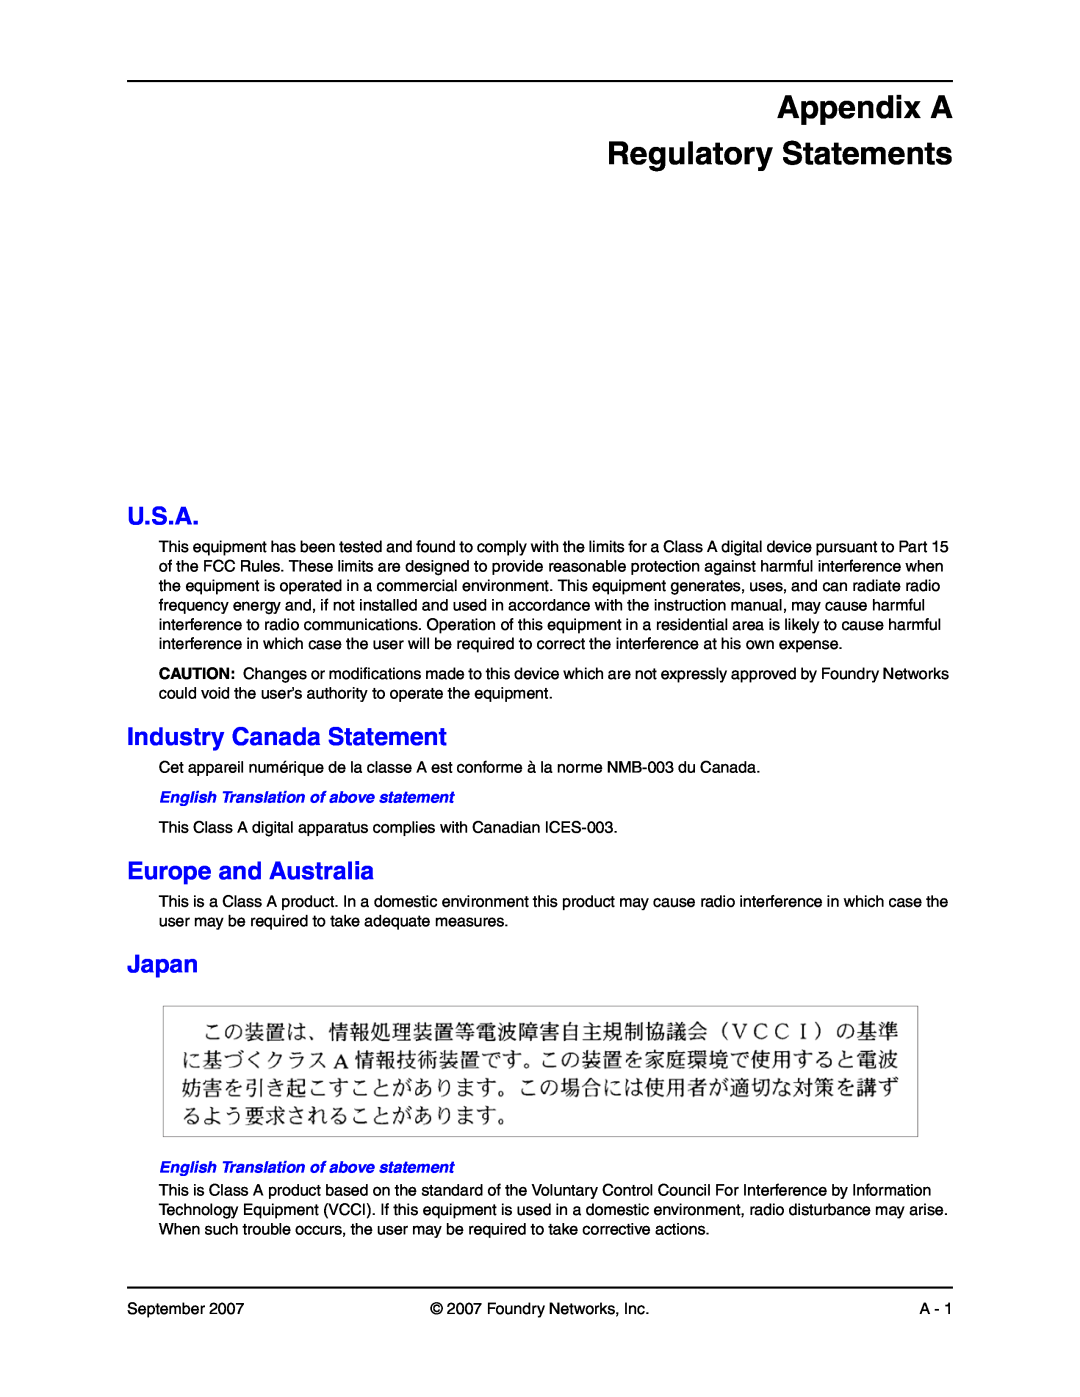 Foundry Networks LS 648 Appendix A Regulatory Statements, U.S.A, Industry Canada Statement, Europe and Australia, Japan 